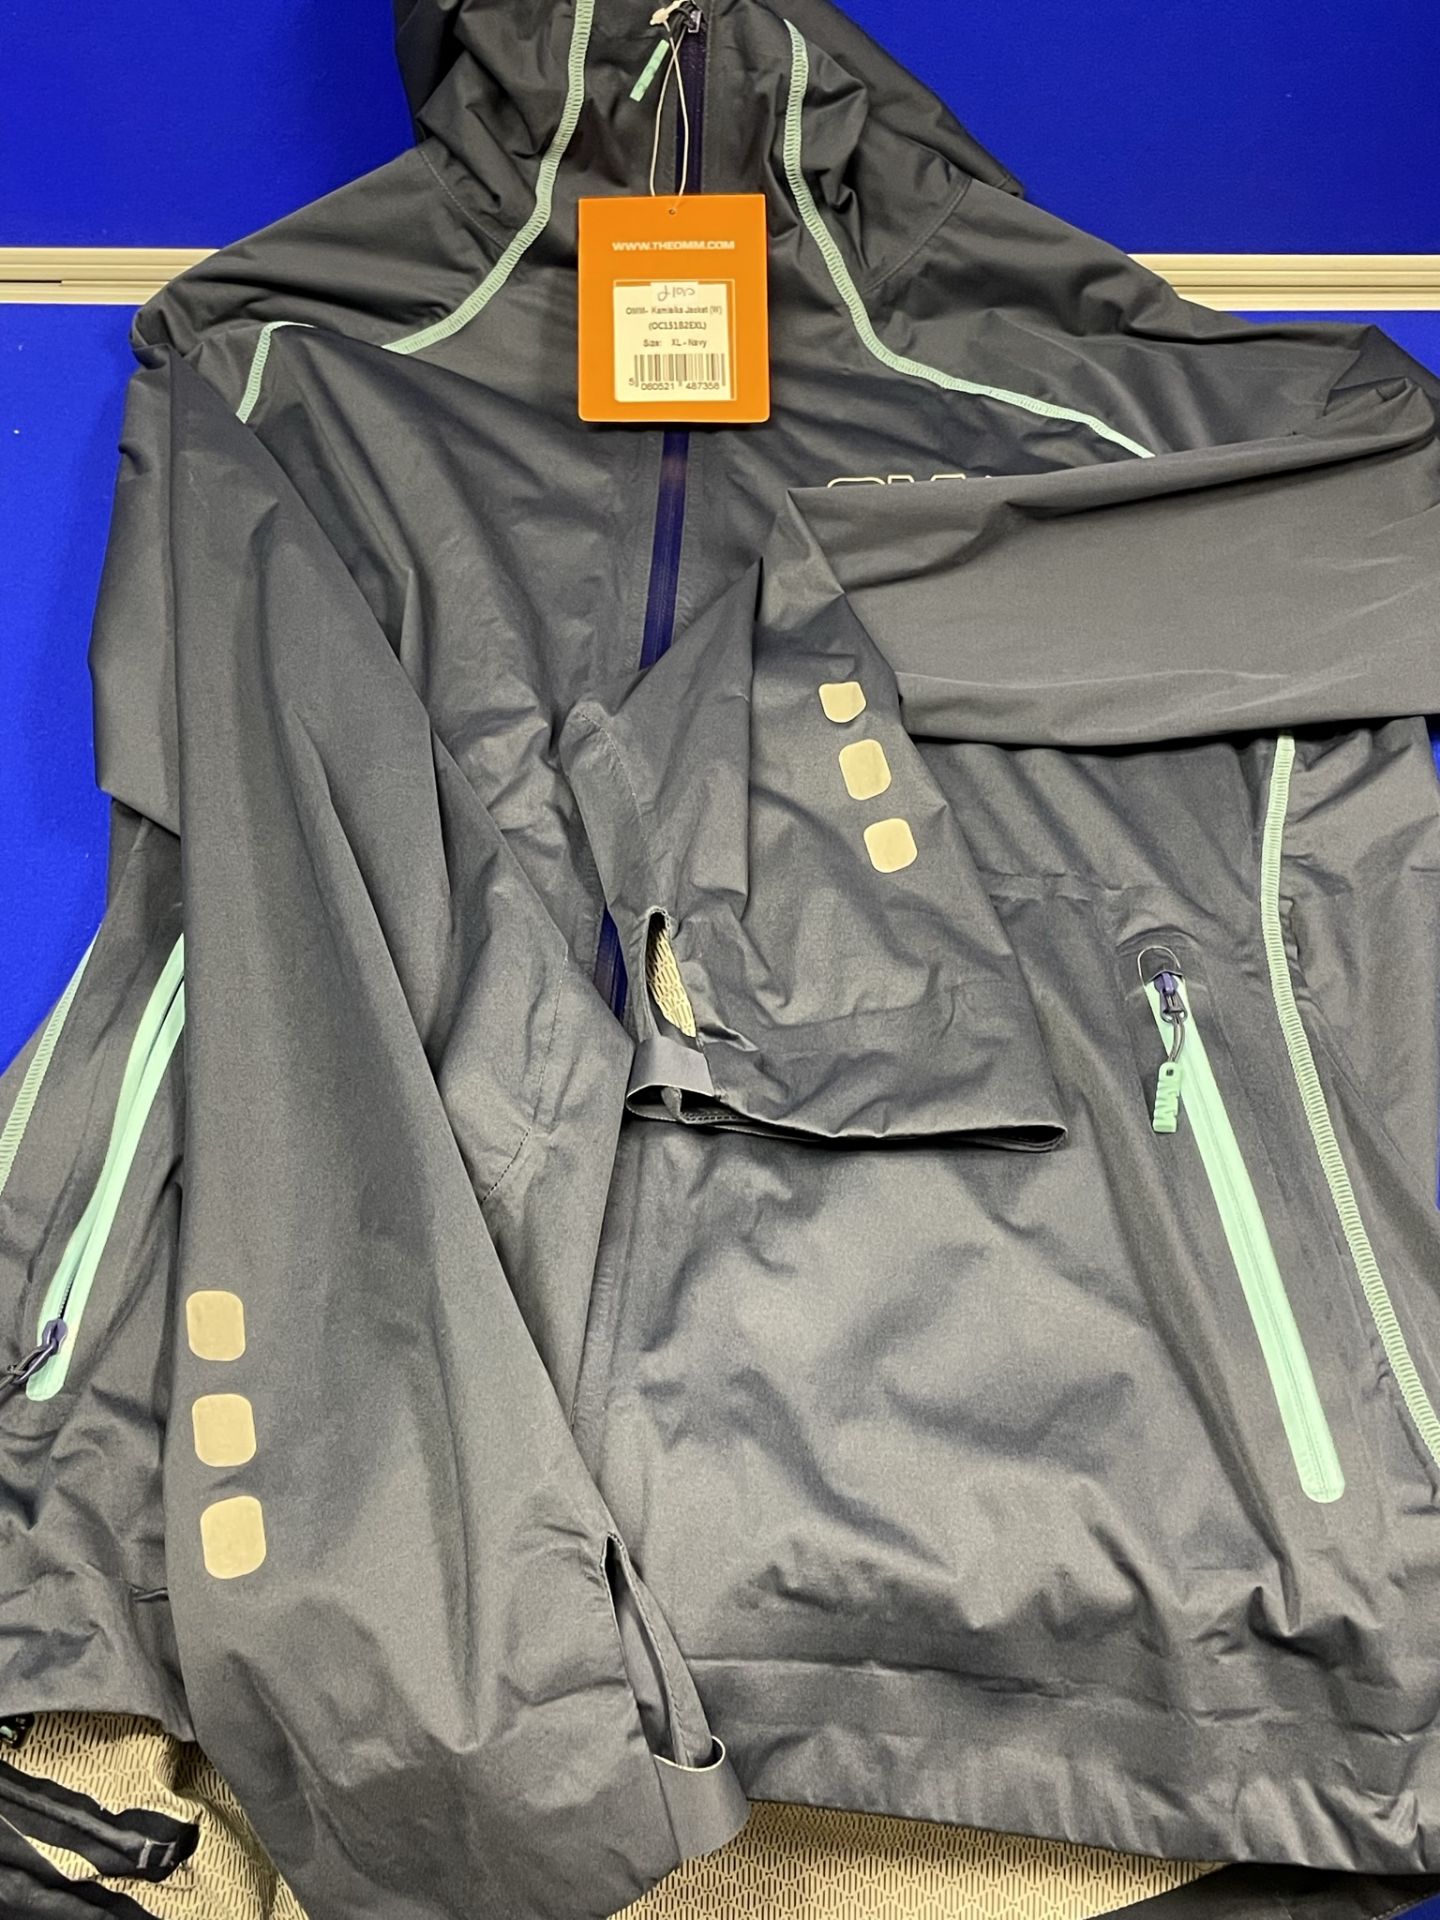 2 x OMM Sports Tops/Jackets | Total RRP £255 - Image 5 of 6